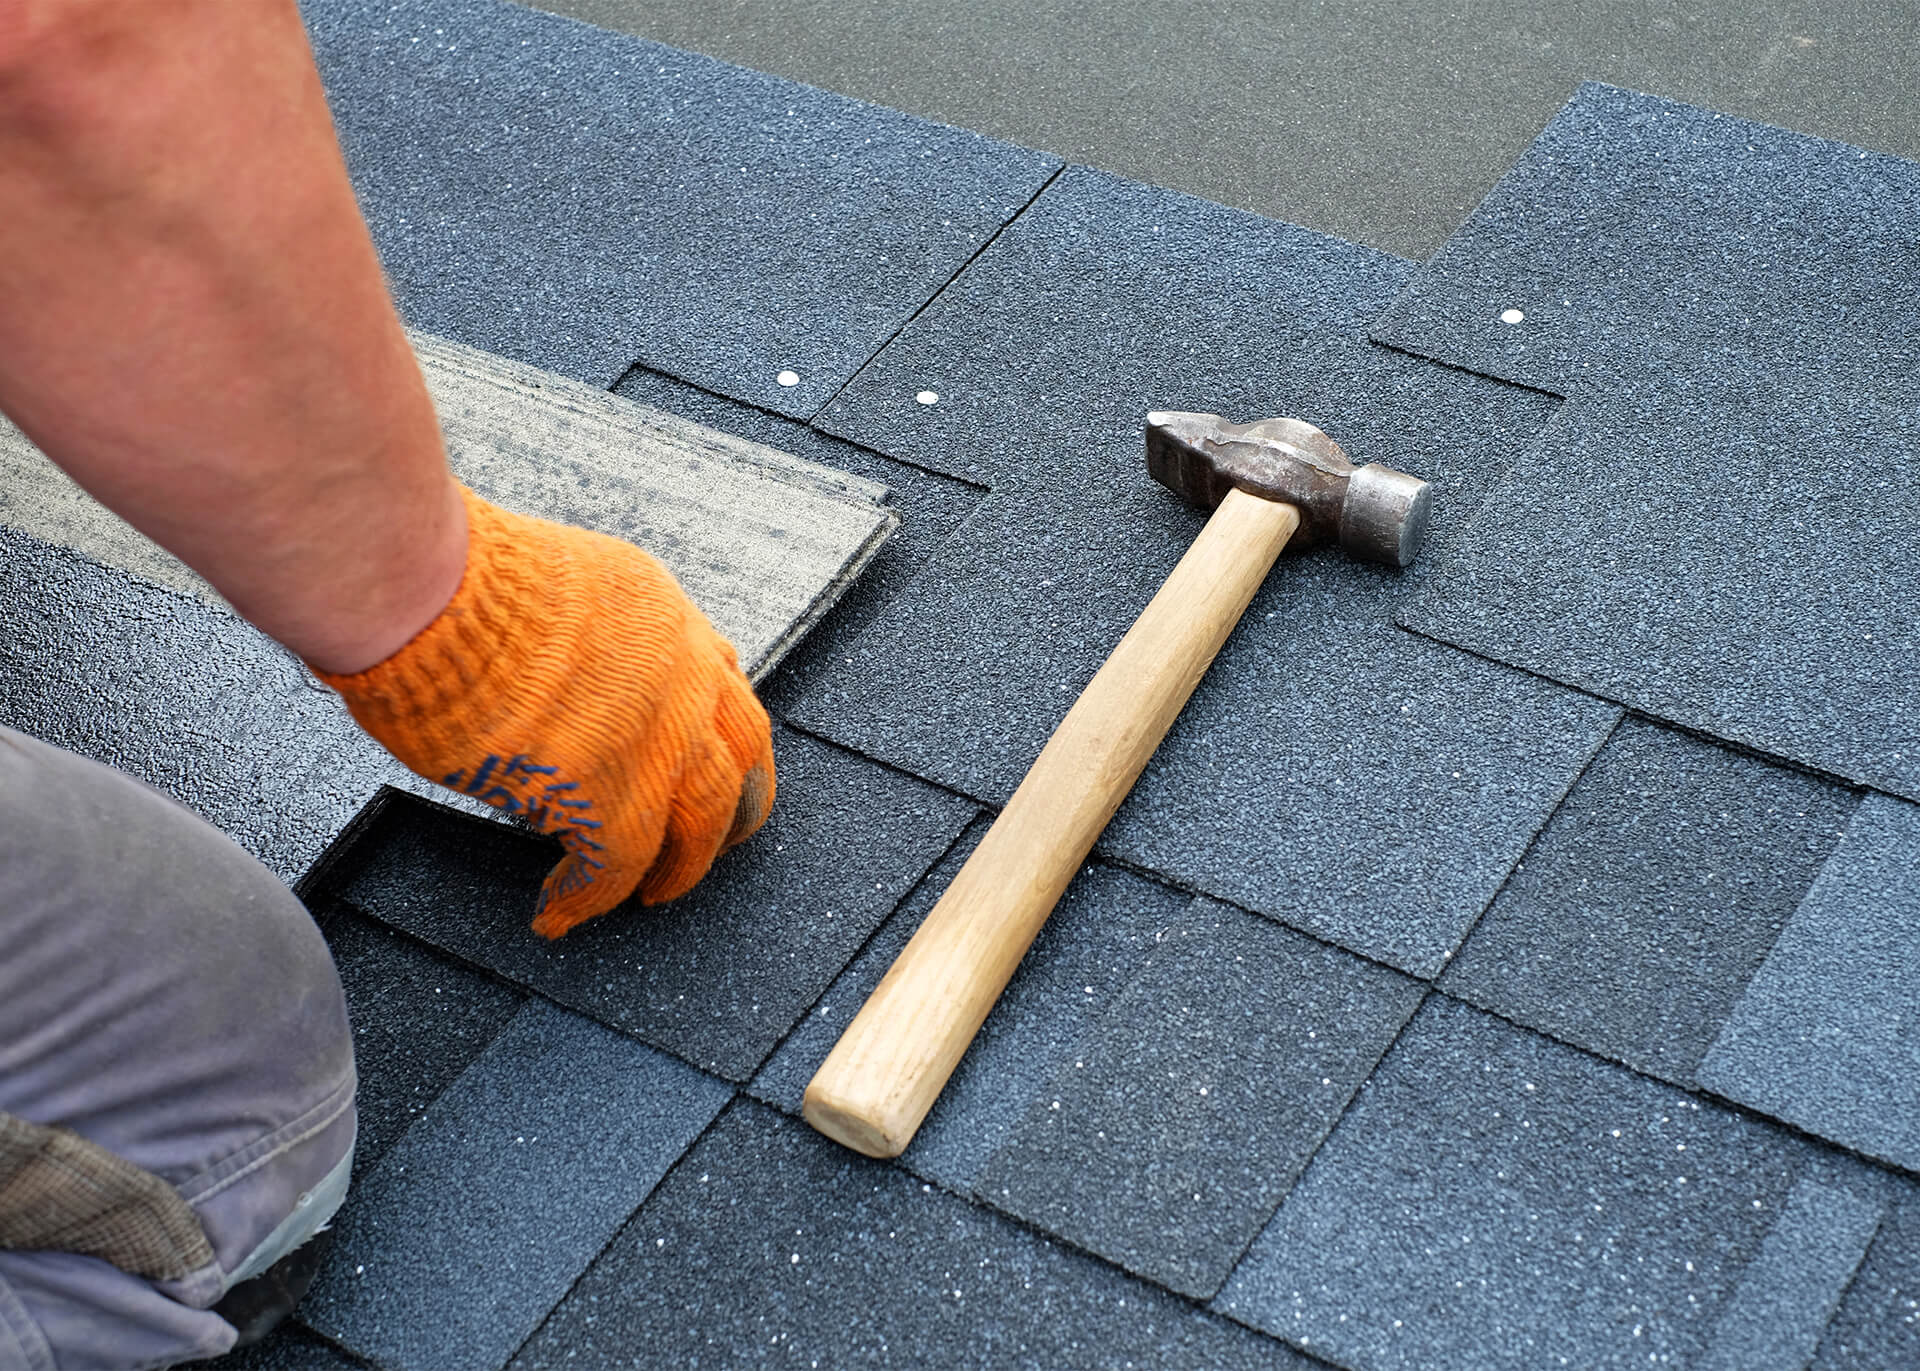 Residential roofing innovations